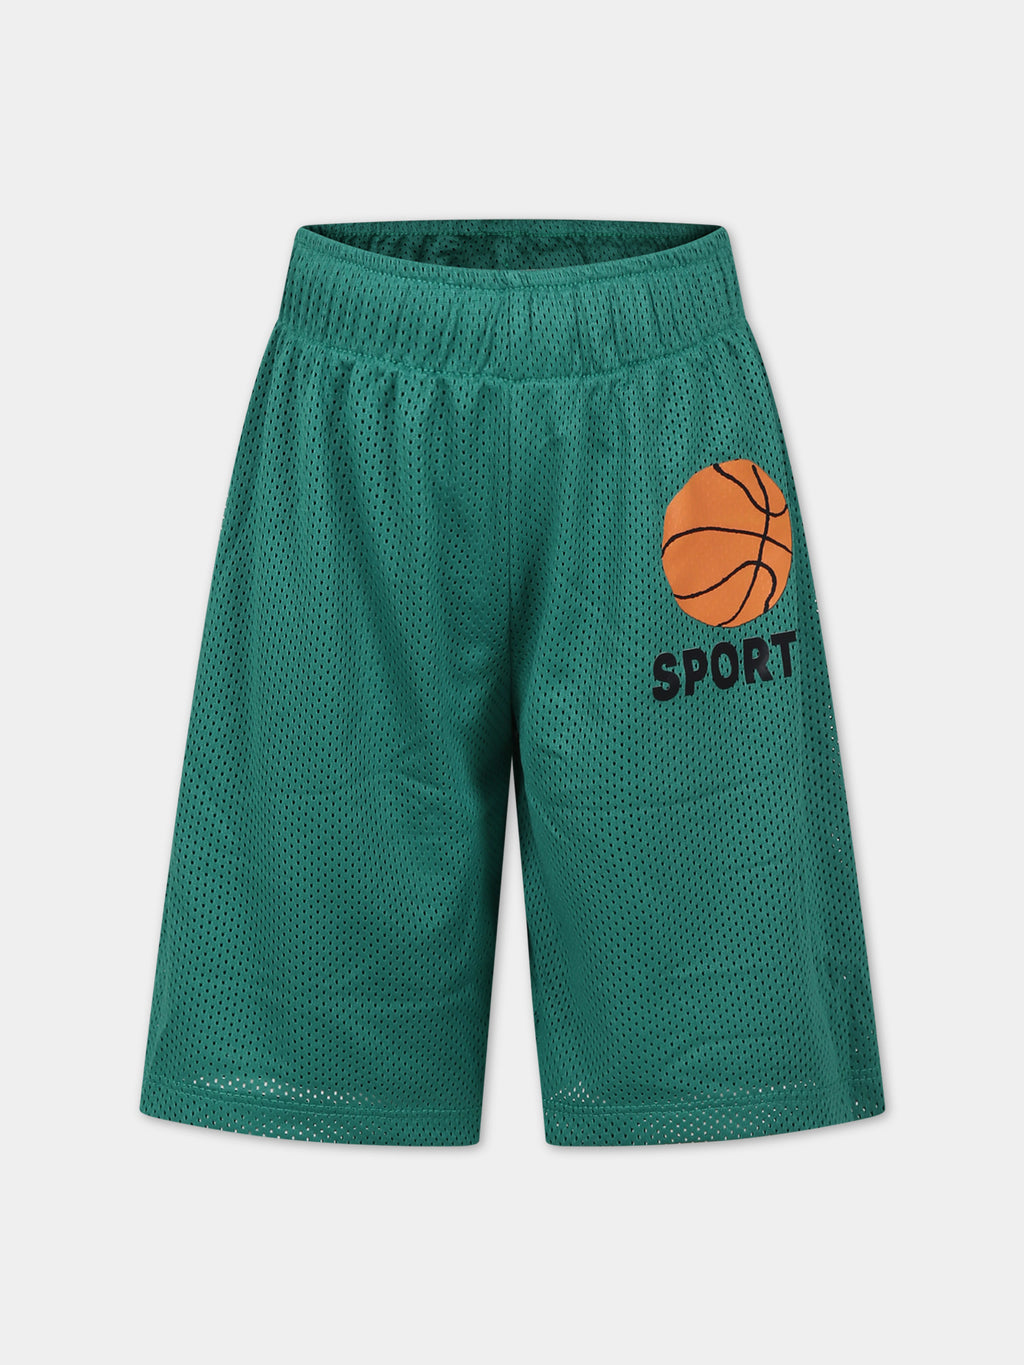 Green sports shorts for kids with basketball